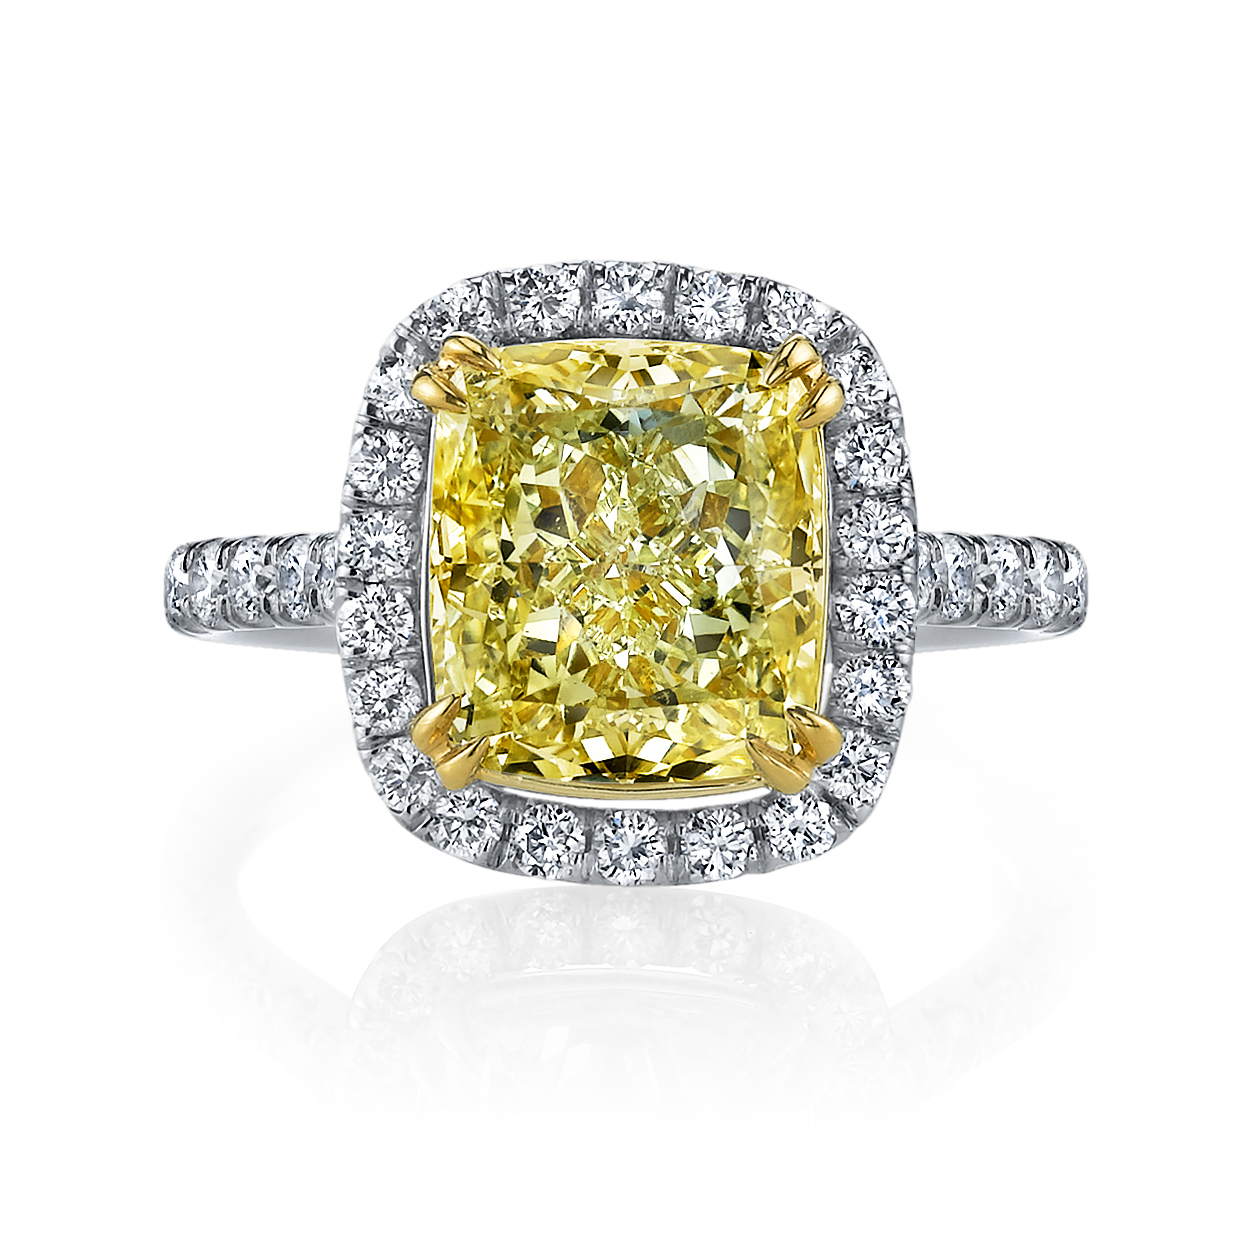 Hope you are enjoying our featured halo-style engagement rings this ...